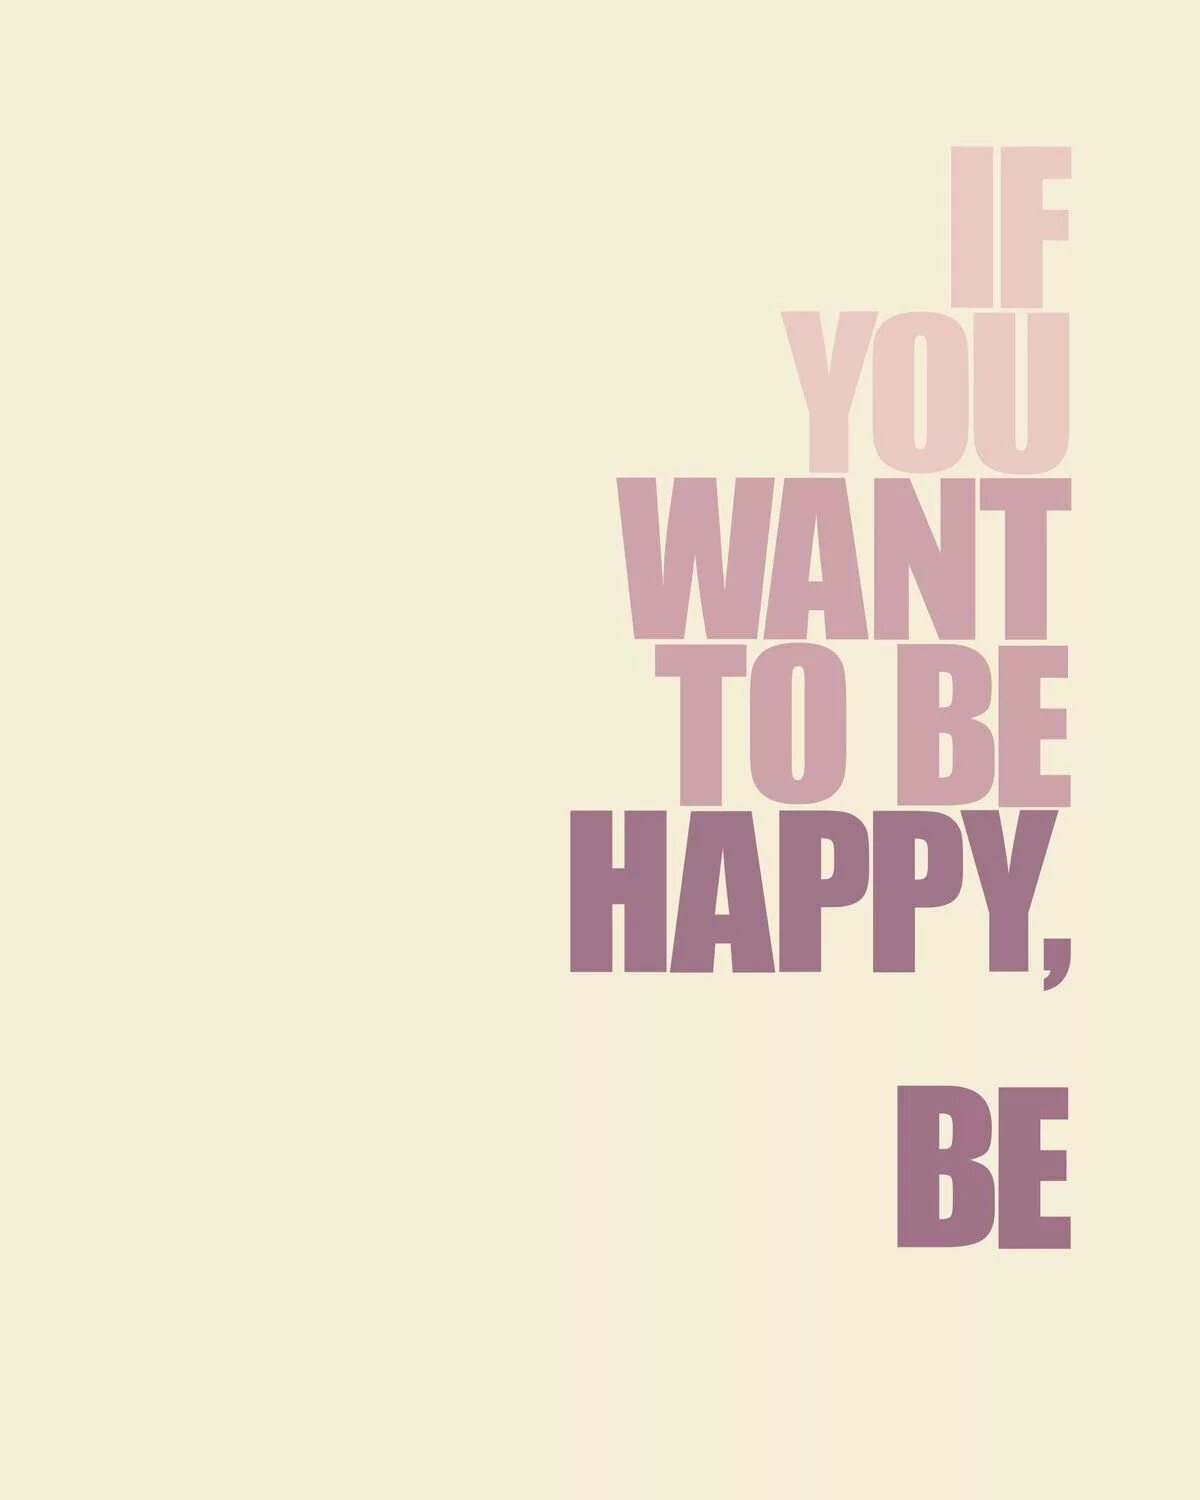 Be happy away. If you want to be Happy be. Be Happy. Цитаты be Happy be. I want to be Happy картинки.